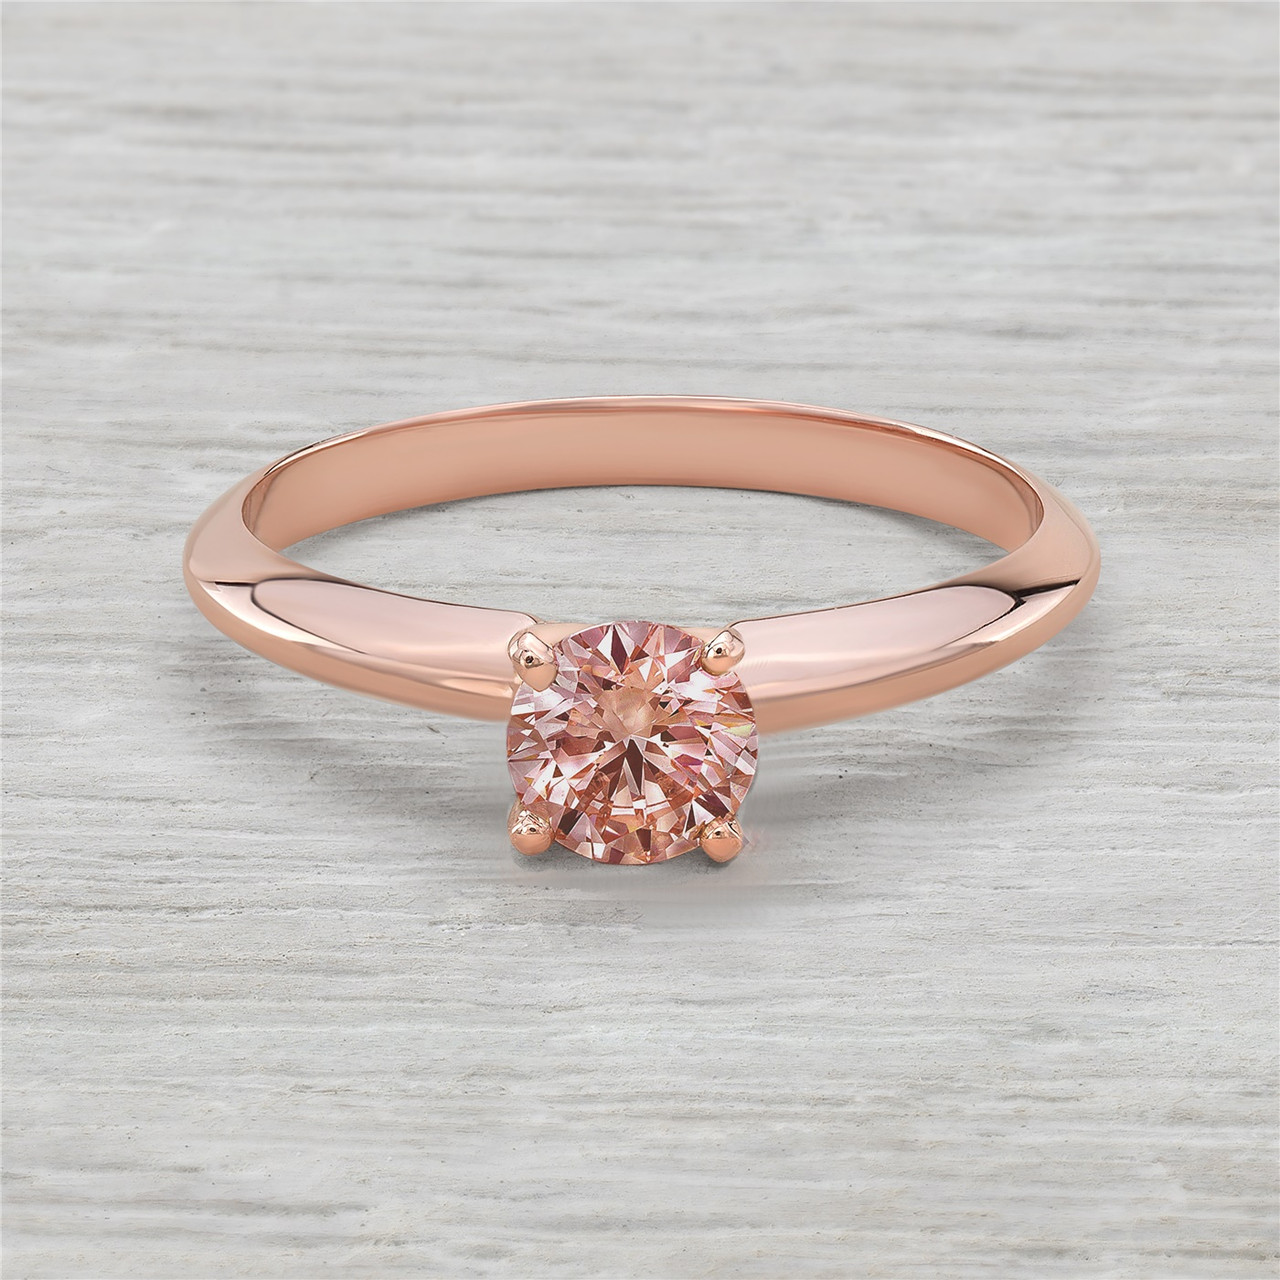 .54ct (half carat) Pink Diamond Solitaire Engagement Ring in 14K Rose Gold